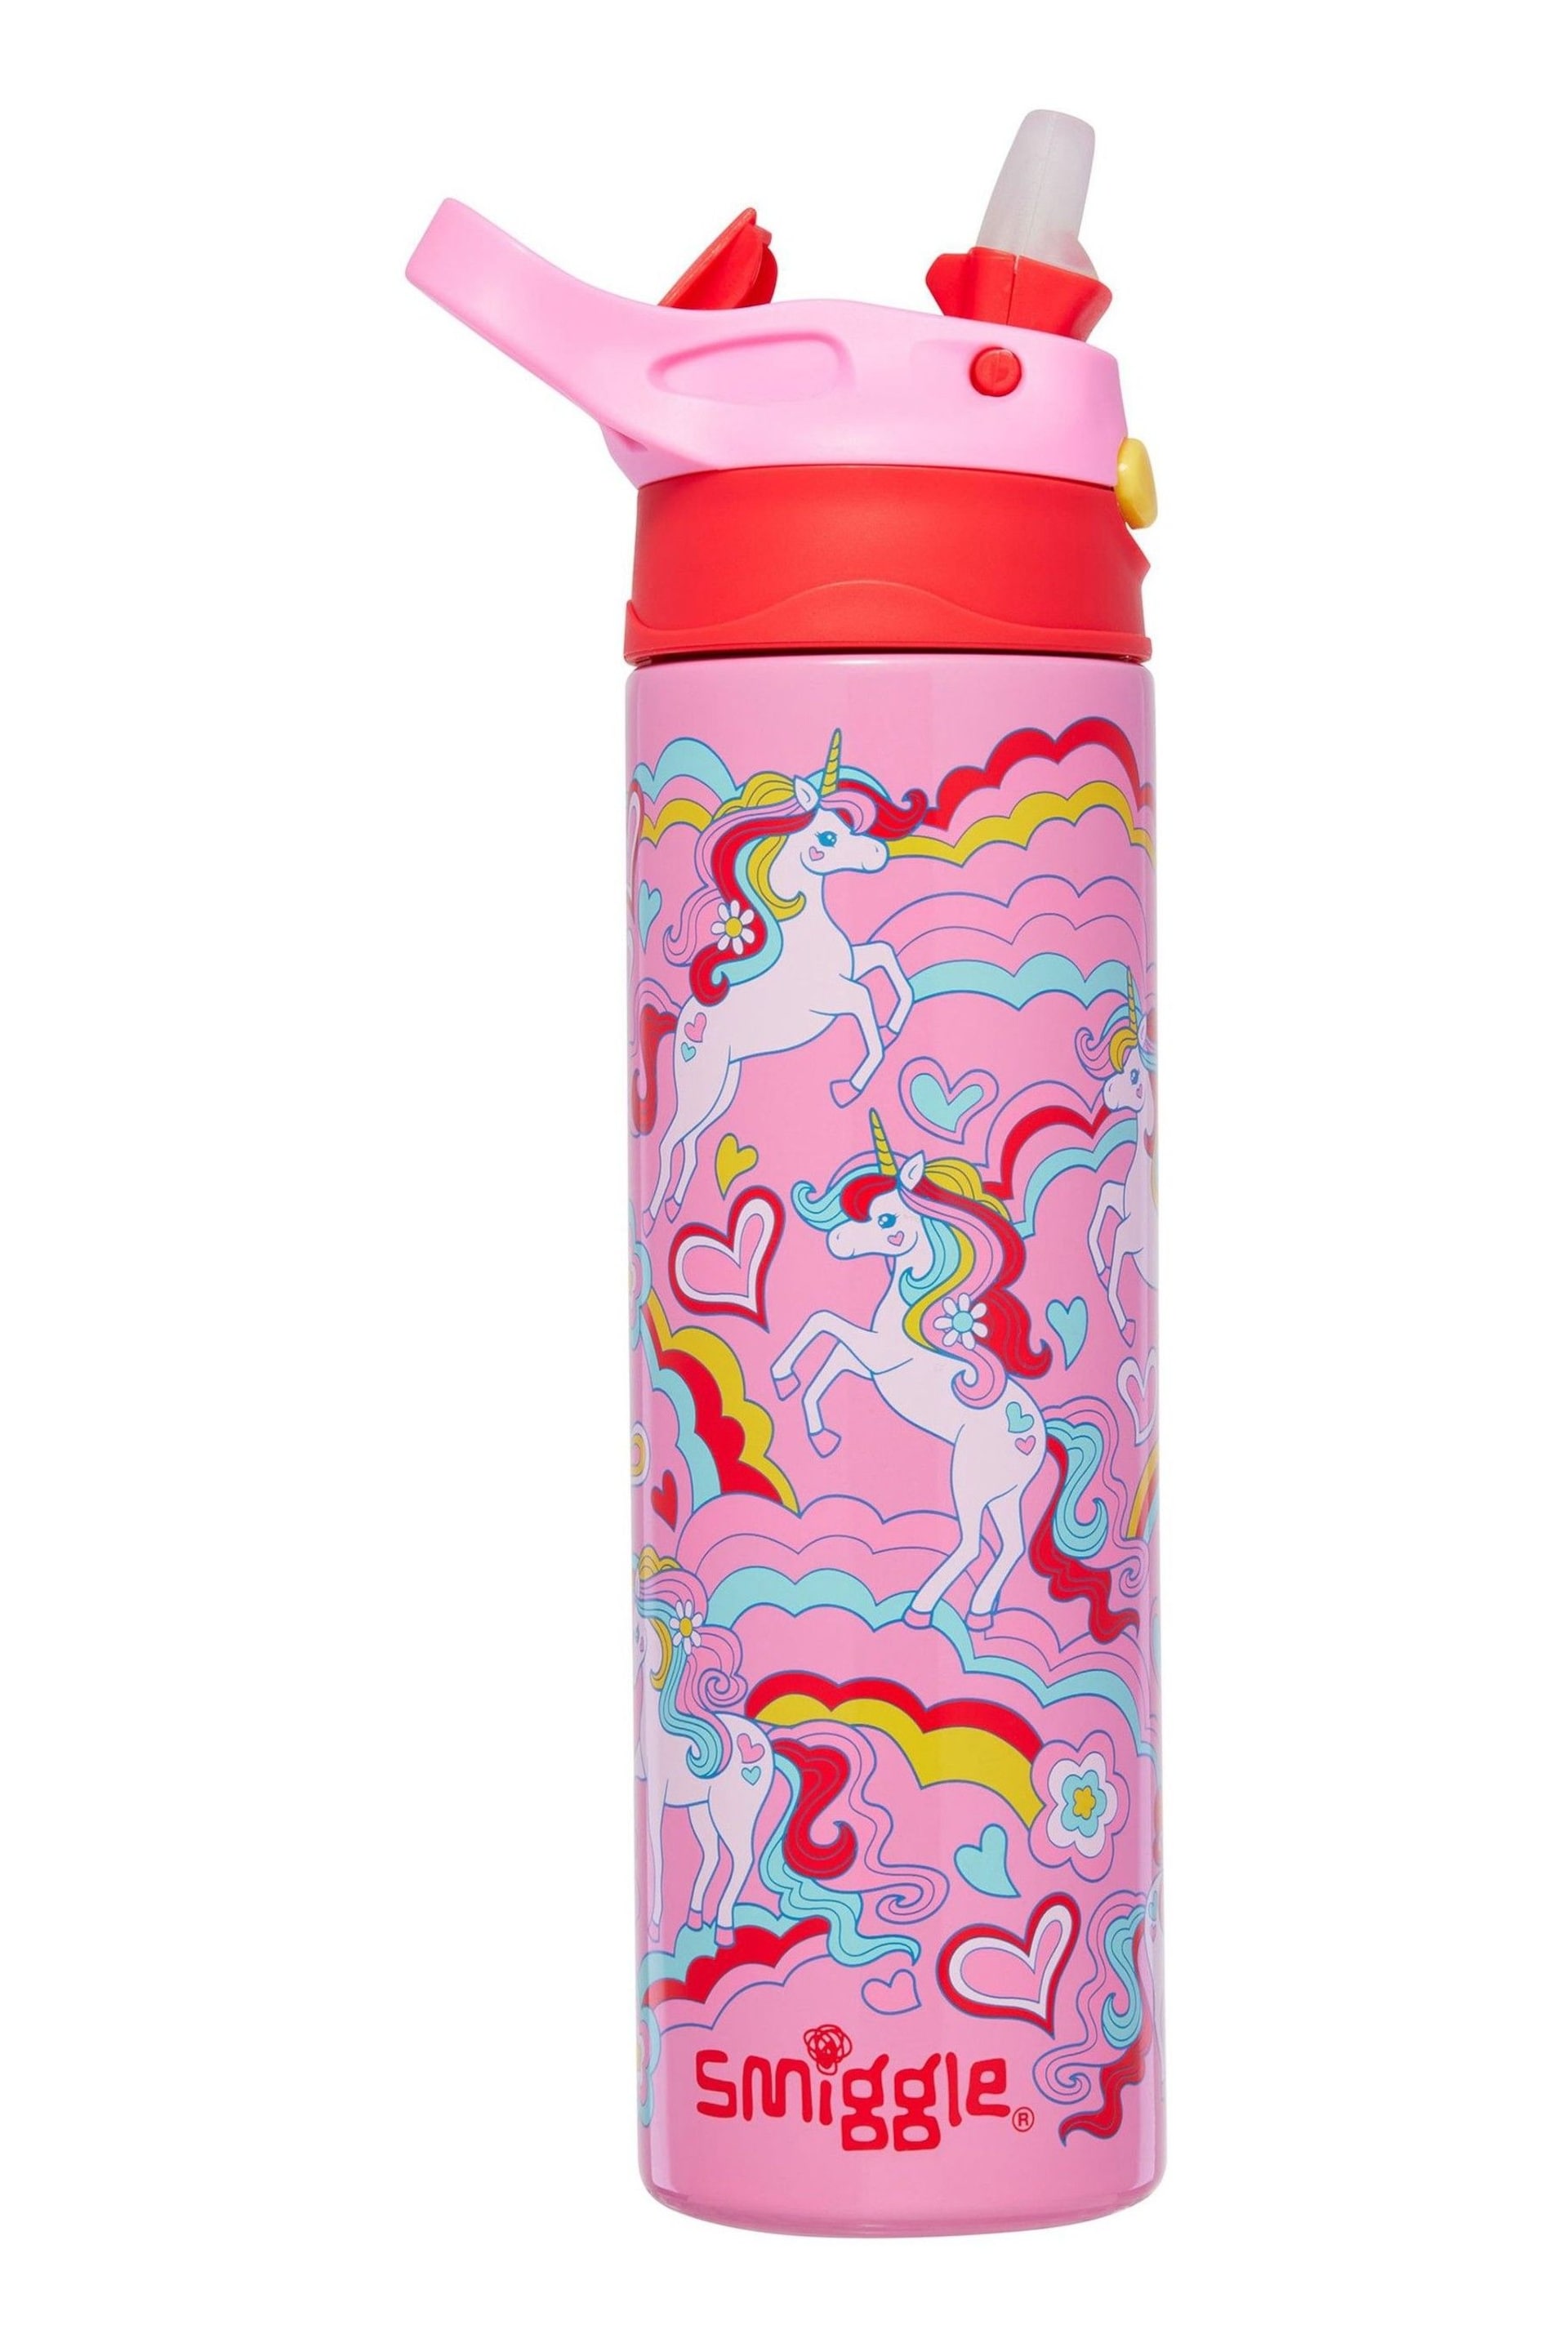 Smiggle Pink Wild Side Insulated Stainless Steel Flip Drink Bottle 520Ml - Image 2 of 2